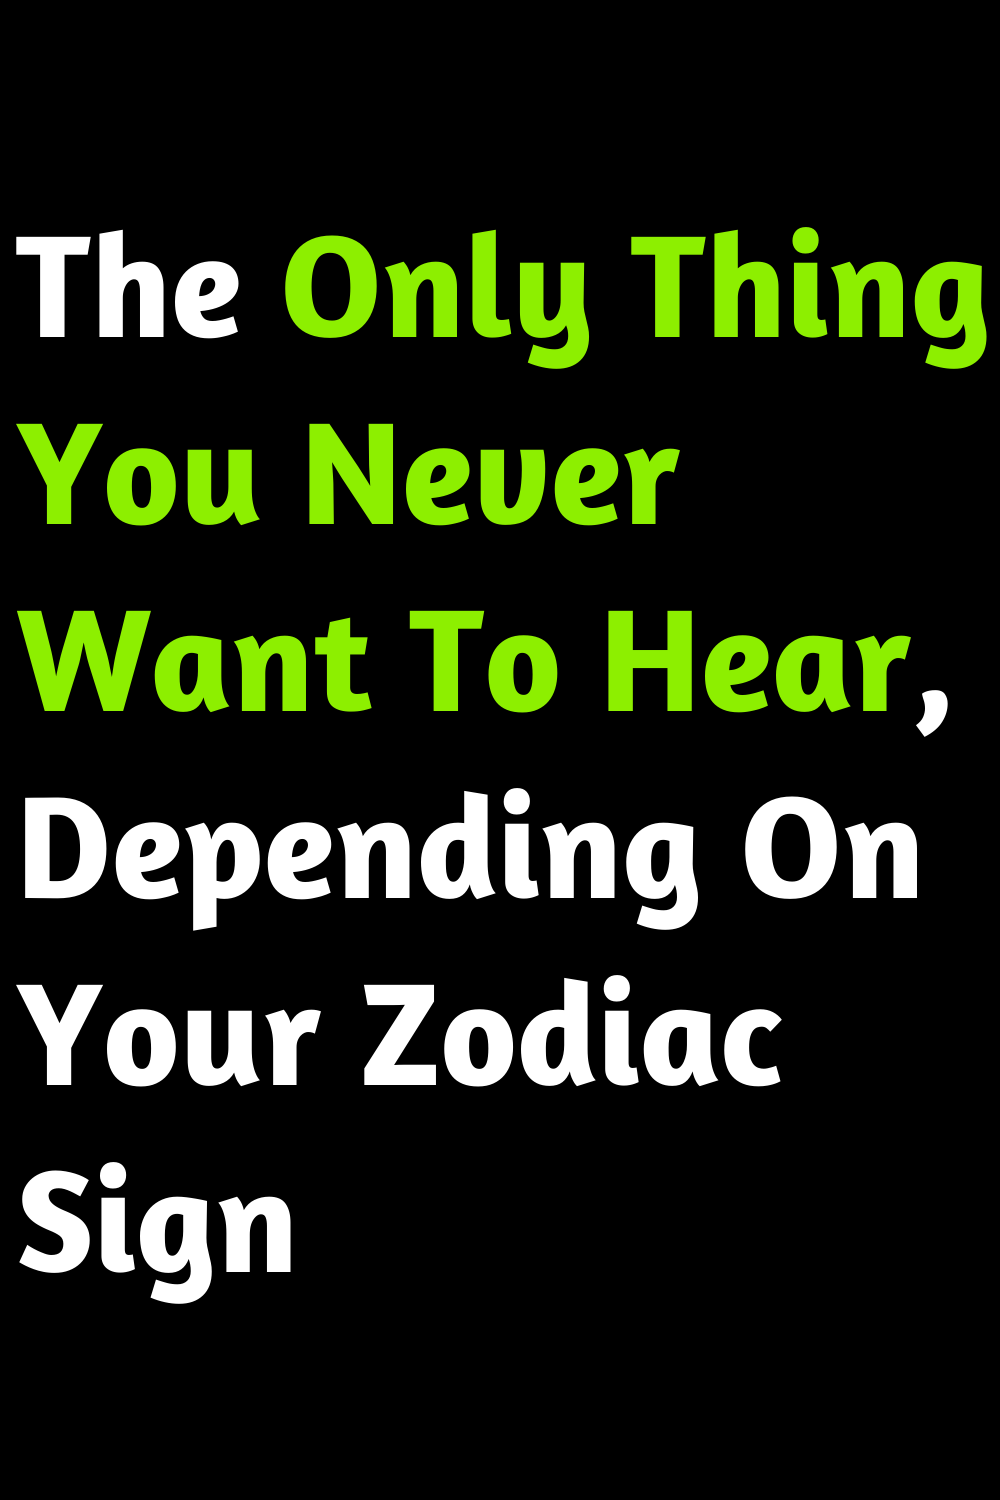 The Only Thing You Never Want To Hear, Depending On Your Zodiac Sign